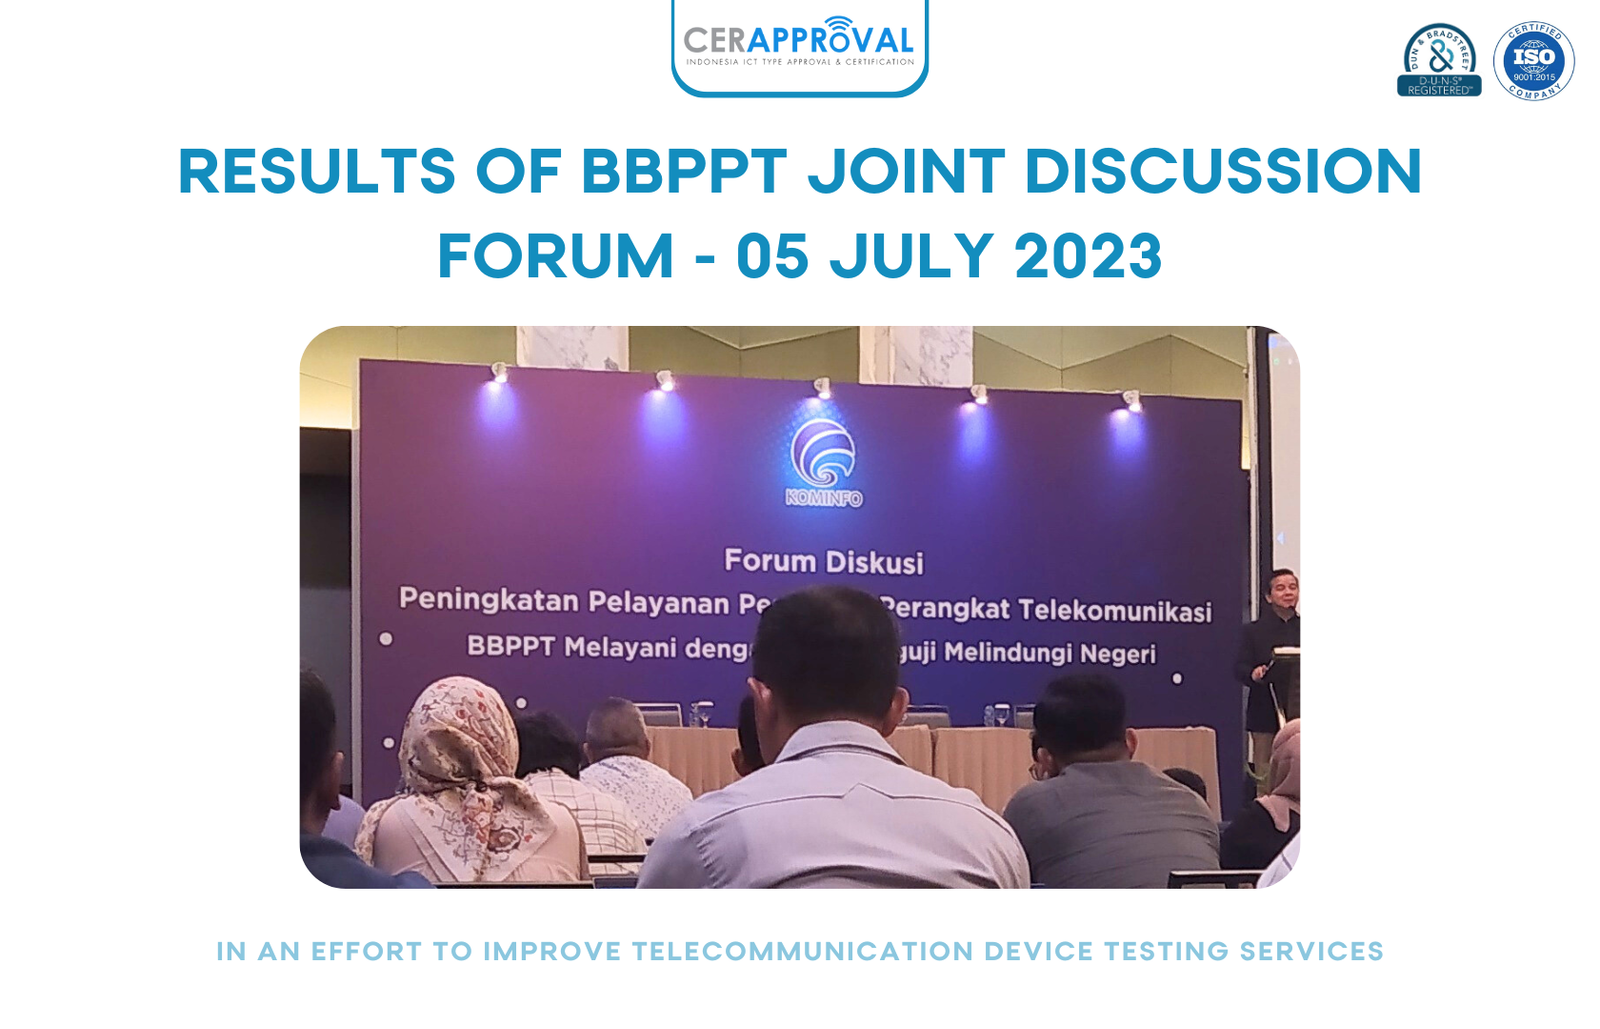 SDPPI PLANS TO REQUIRE THE RESULTS OF THE SAR TEST, HERE ARE THE RESULTS OF THE DISCUSSION FORUM WITH BBPPT